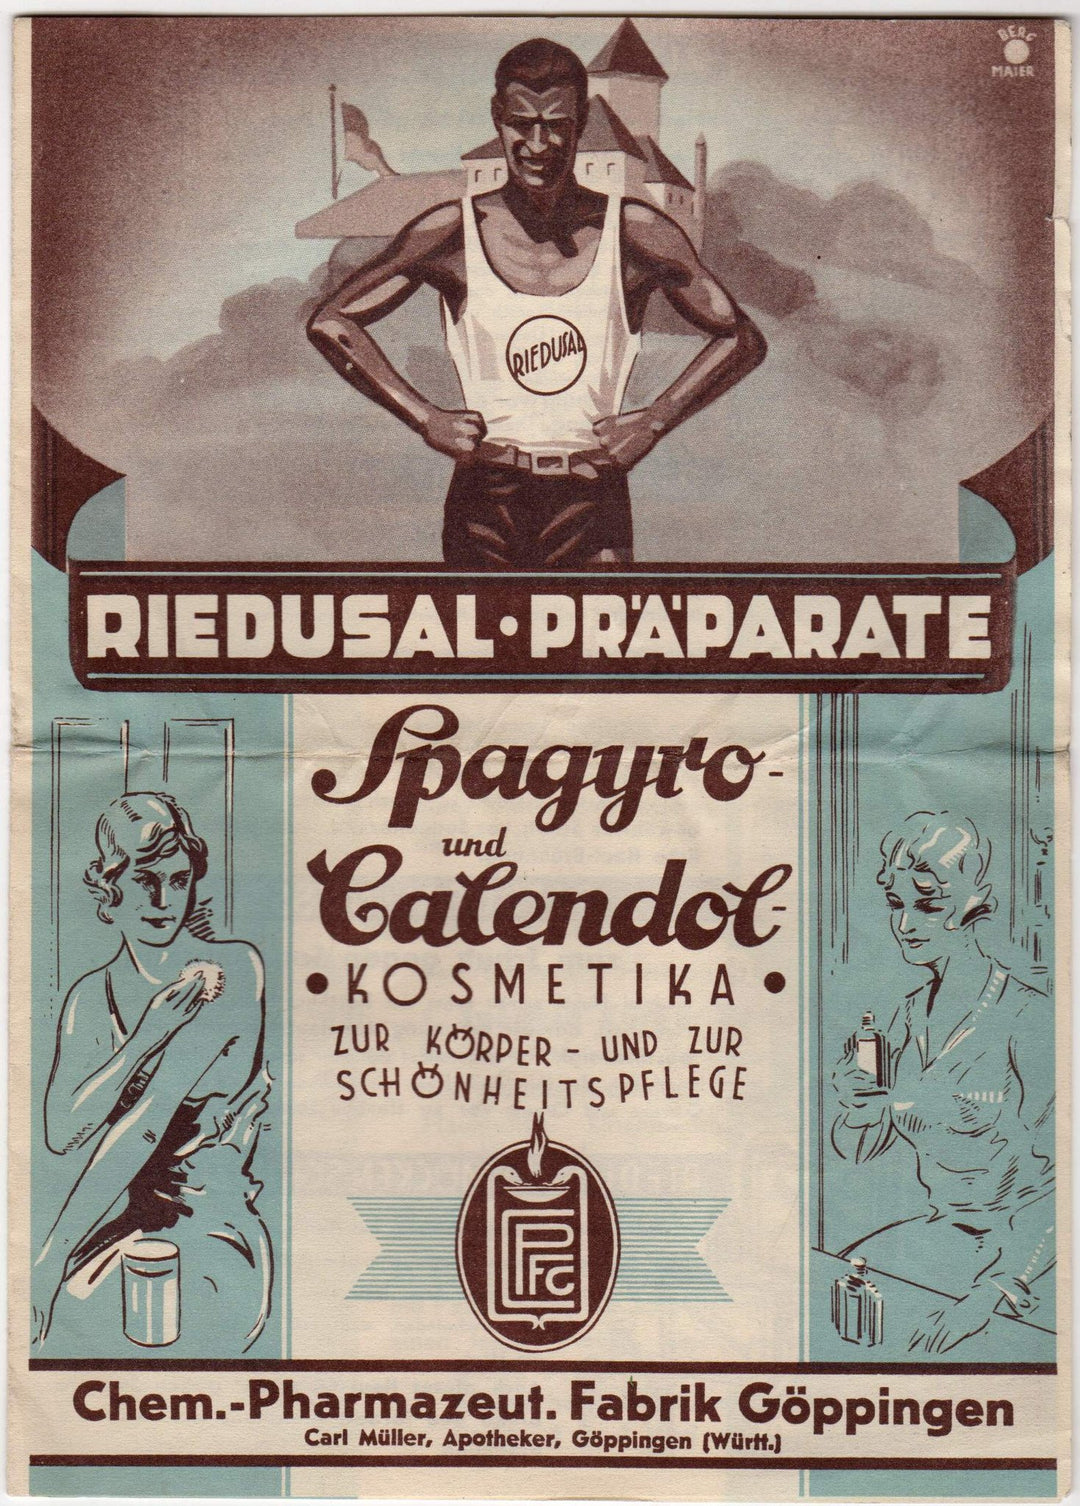 Riedusal Sports Medicine Ointment Vintage German Graphic Advertising Flyer